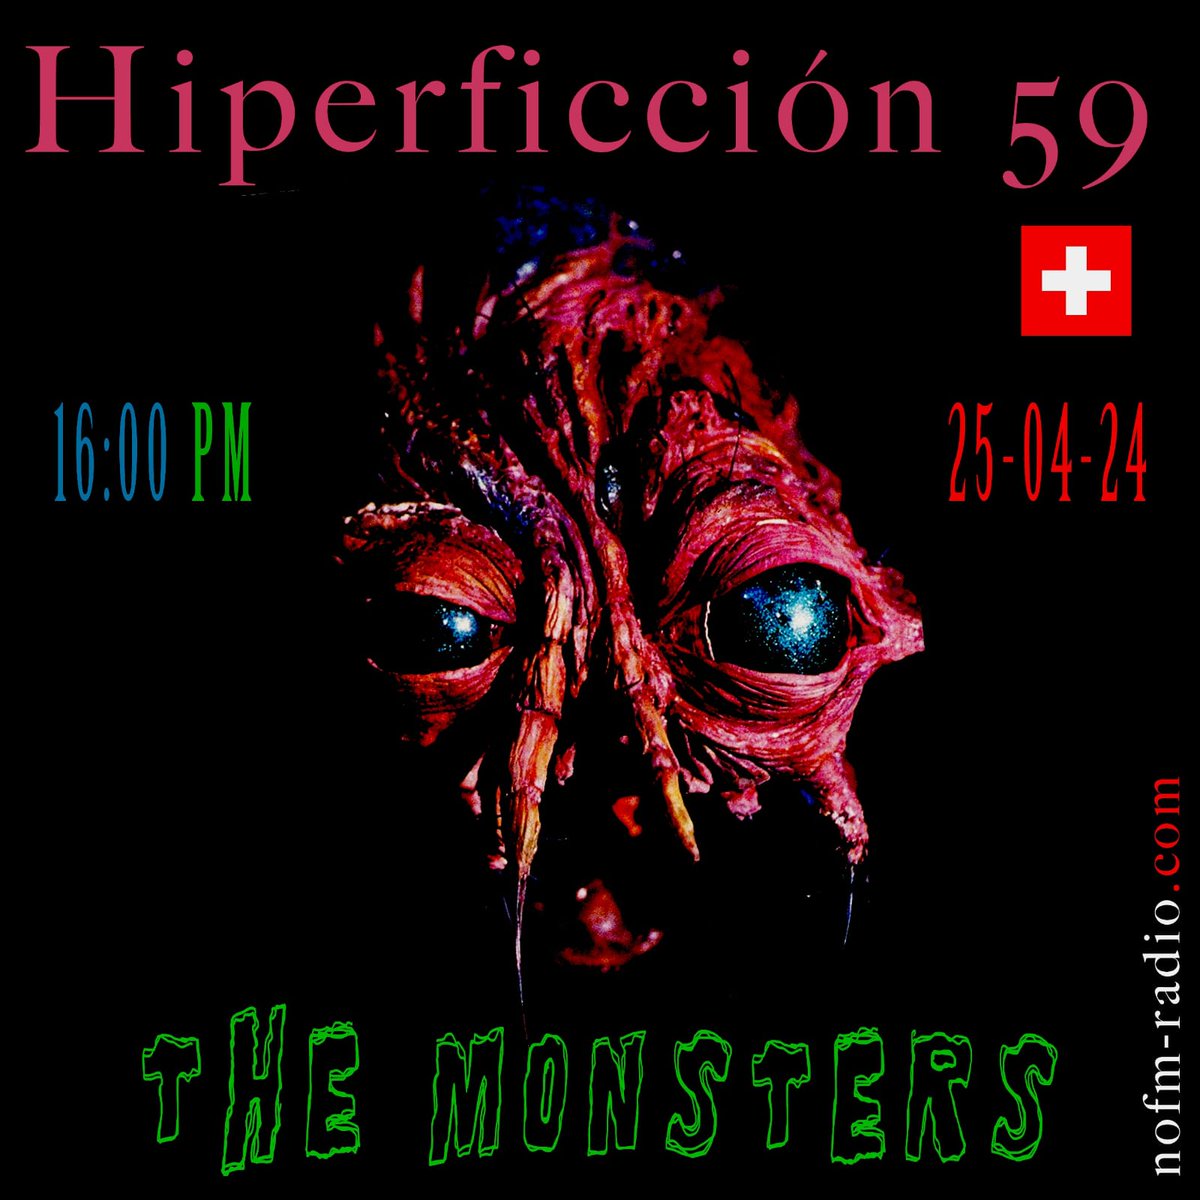 LIVE from Mexico City: The MONSTERS & Pete Slovenly from 4pm to 5pm — to listen, turn your dial to nofm-radio.com #theswissmonsters #voodoorhythmrecords #reverendbeatman #nofmradio